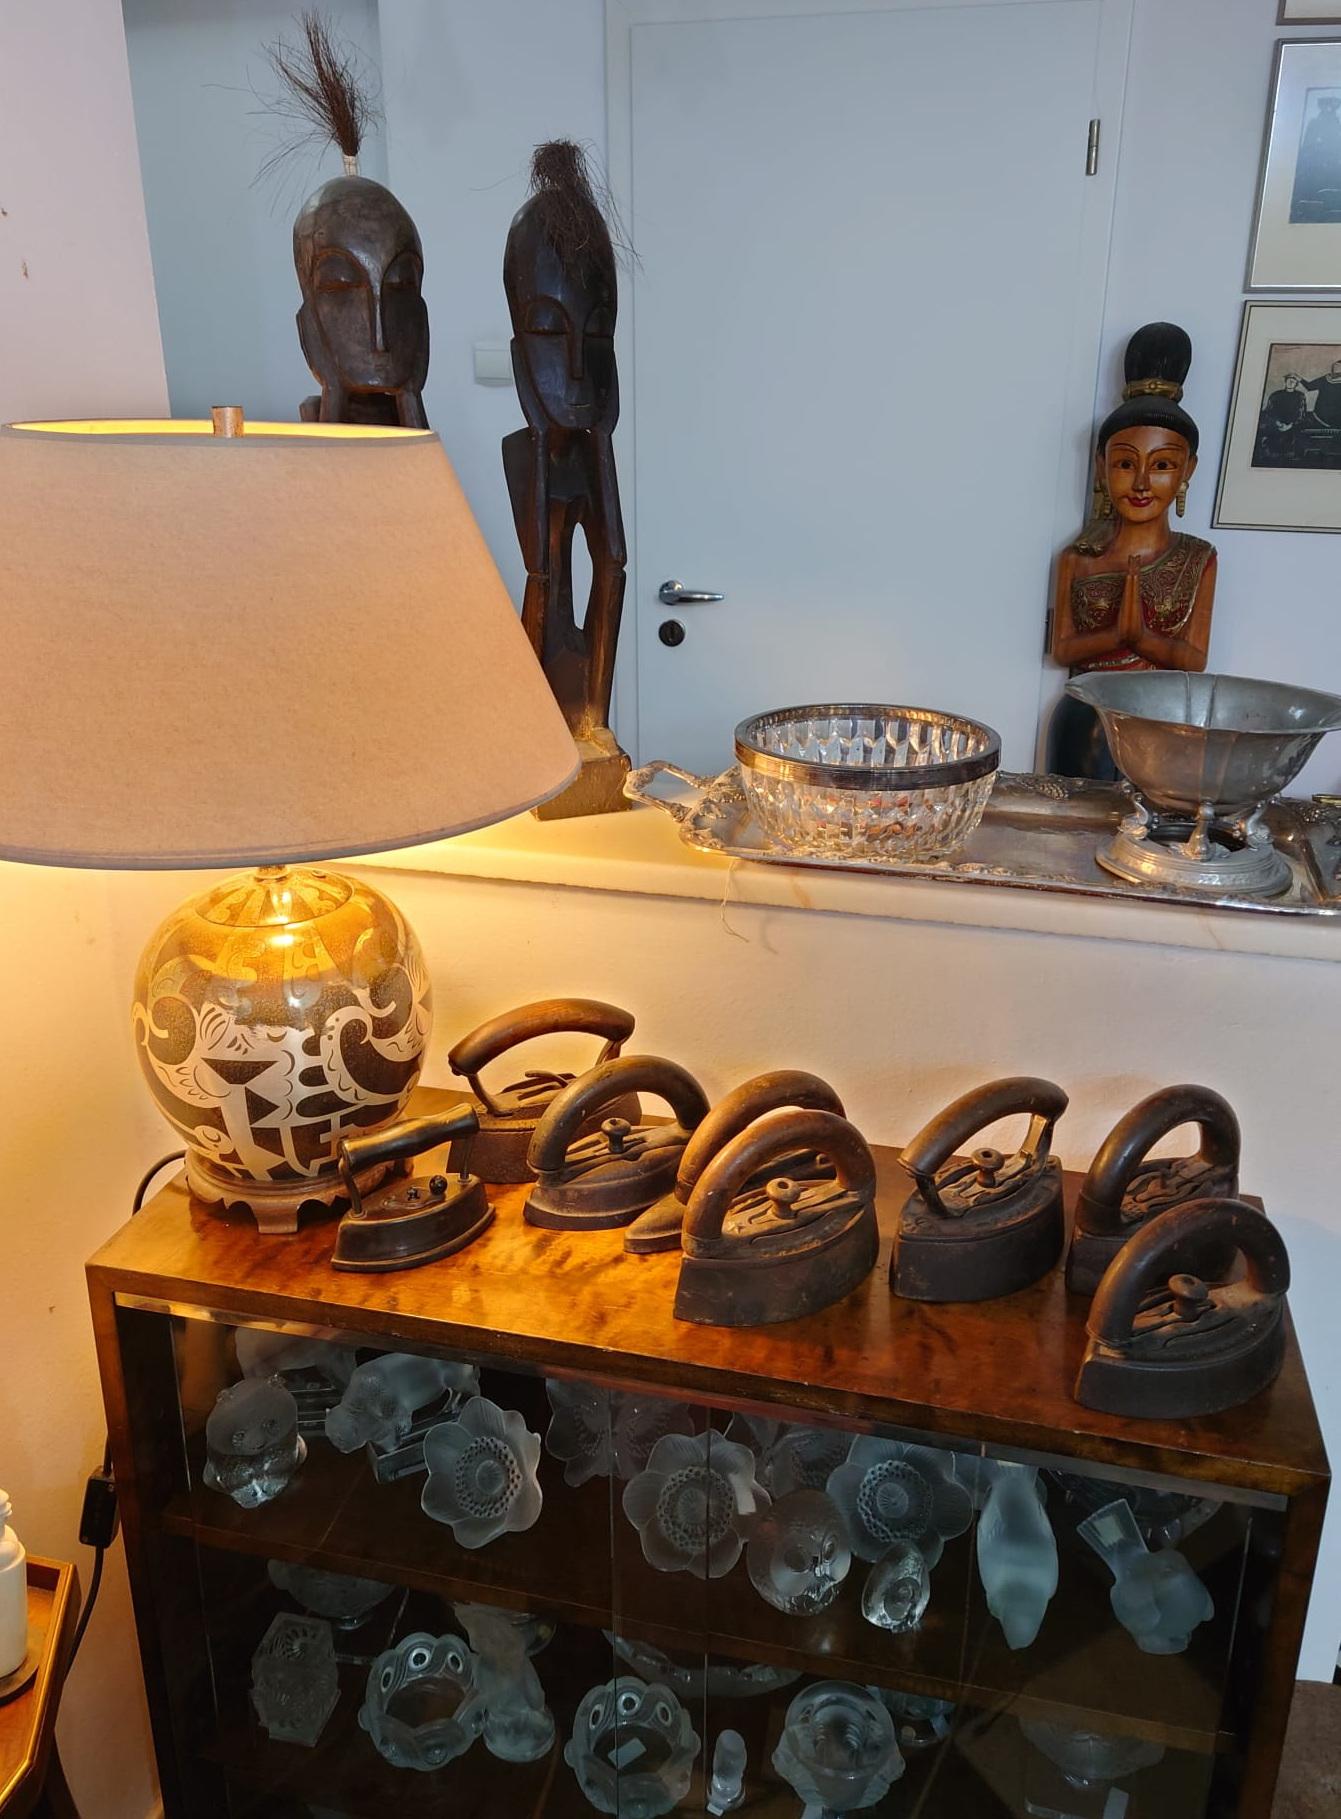 A beautiful collection of eight antique clothes irons / sad irons. 
They are oval-shaped and feature a cast iron base with a detachable wood handle.
Made around 1900s in the United States.
Each marked: Geneva Illinois, Rabenna Ohio, Newark